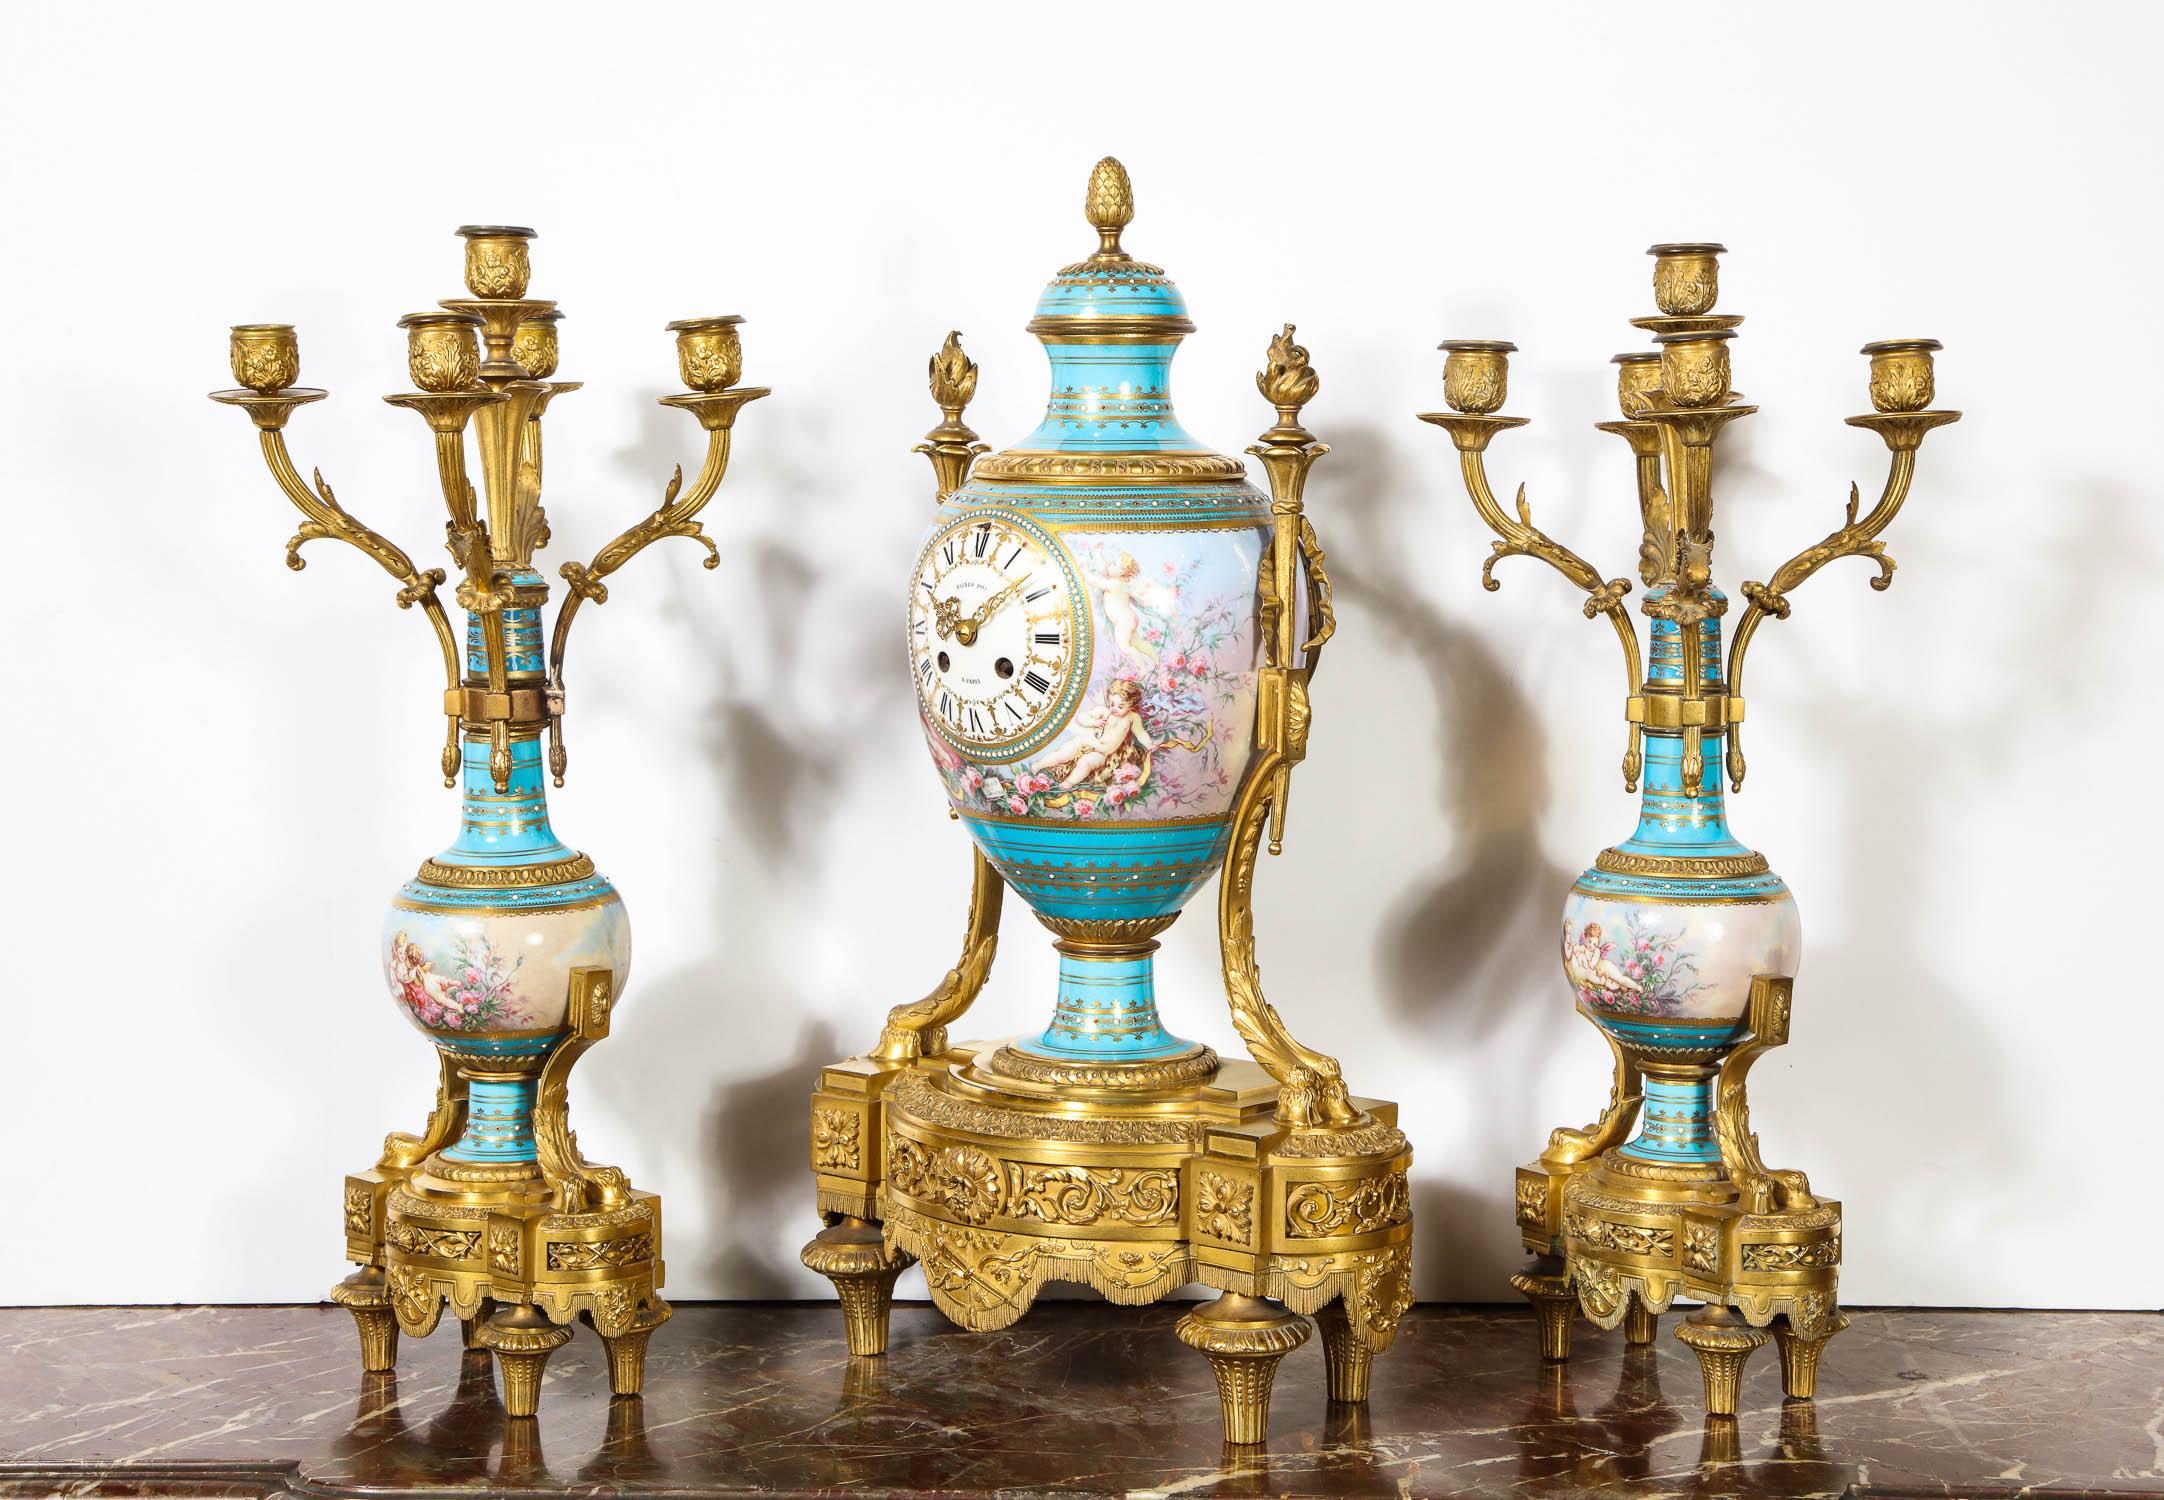 An exceptional French bronze ormolu mounted turquoise jeweled Sèvres Porcelain clock set by Raingo Fres, Paris, circa 1880.

Comprising of a clock in vase form and a pair of five-light candelabra. The ormolu is of very high quality and the